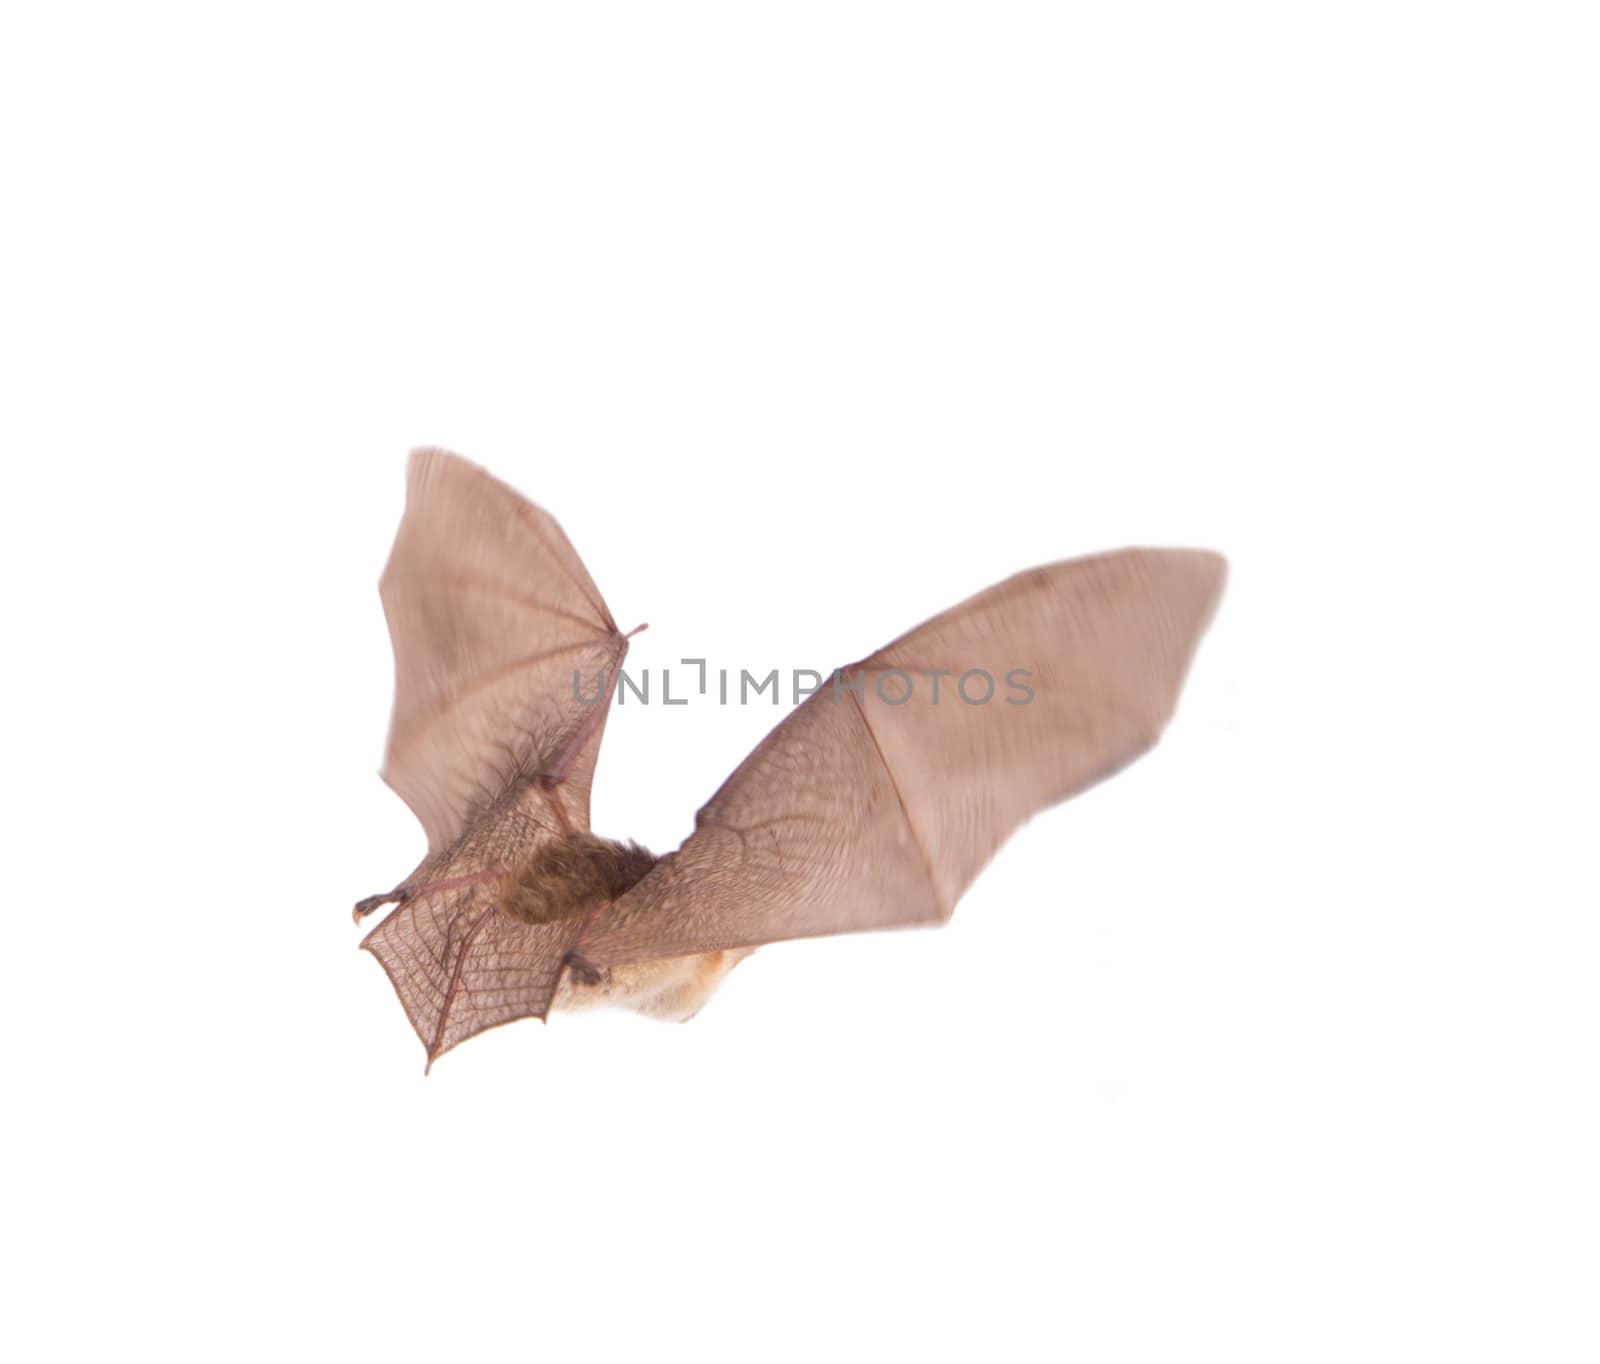 bat close up in flight on a white background